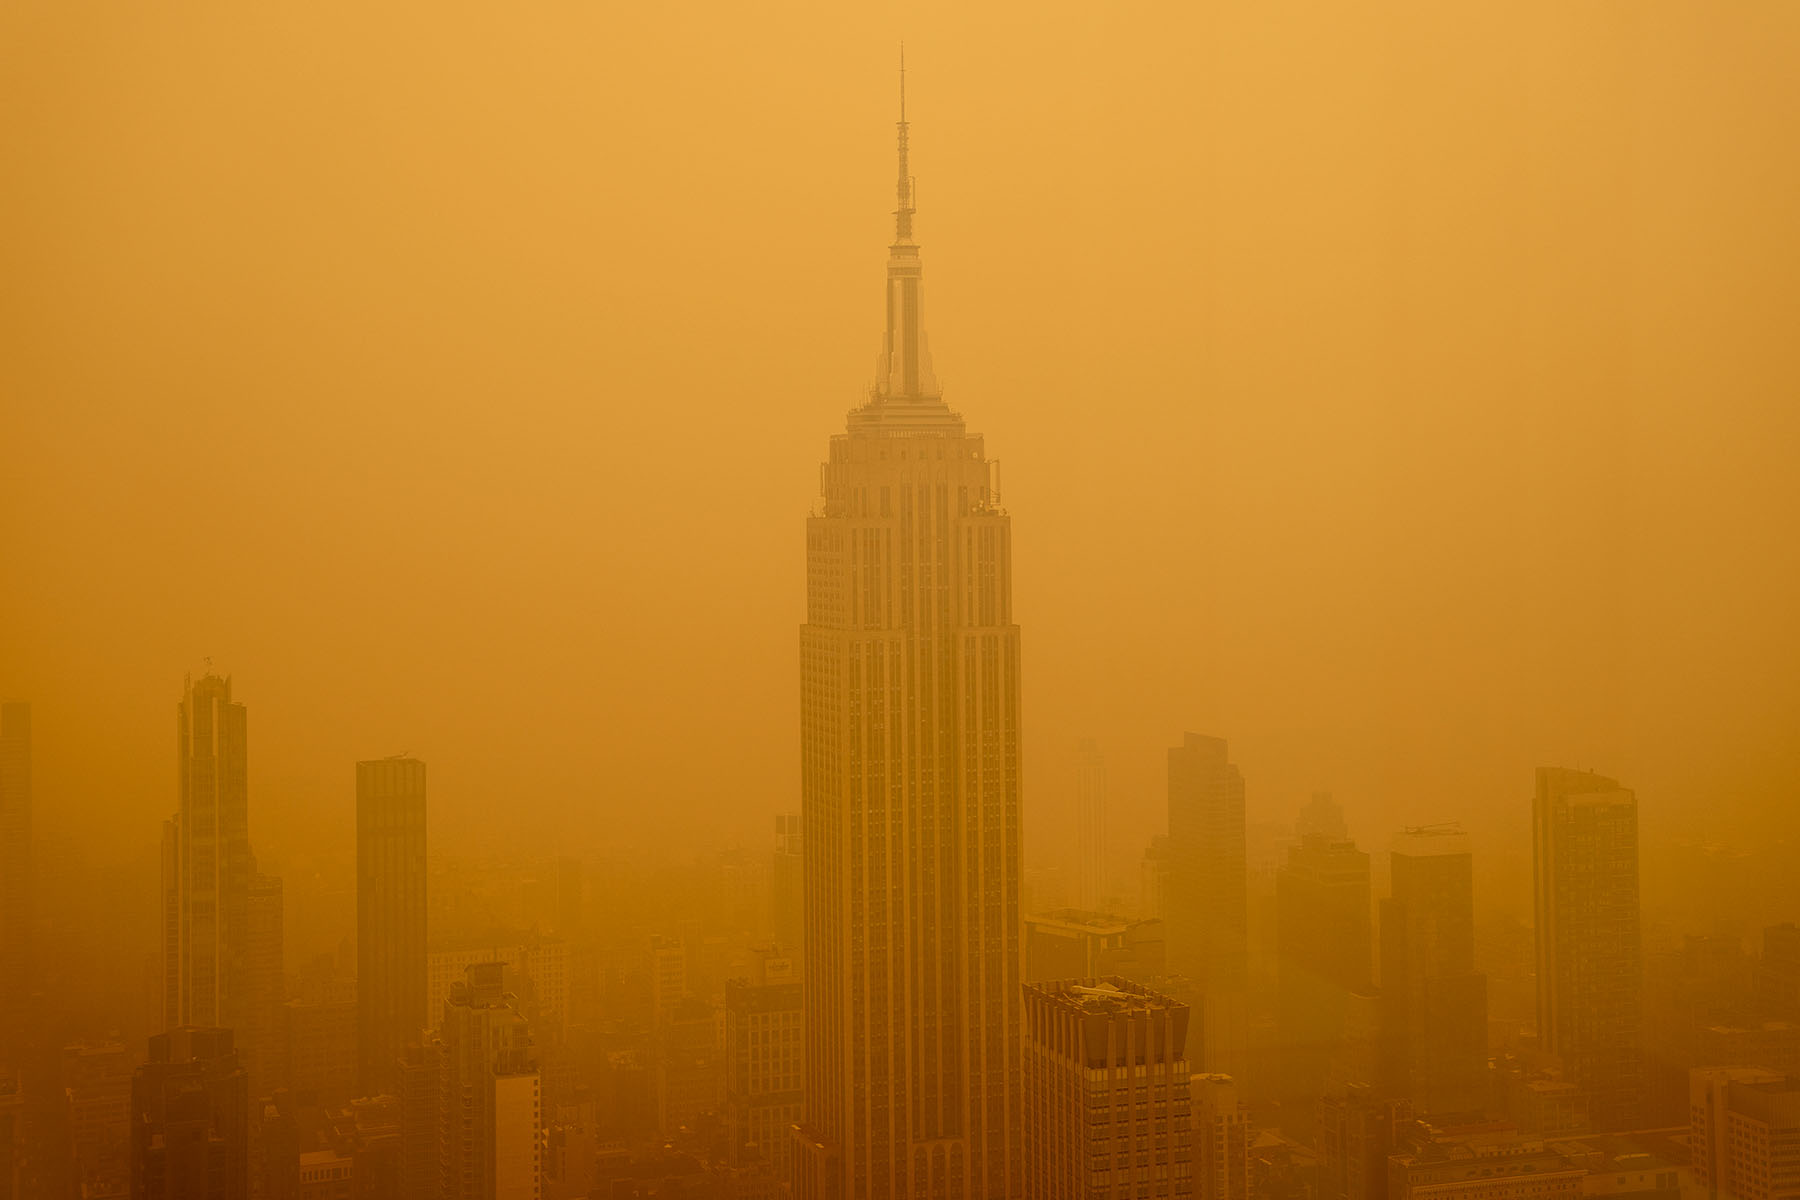 Orange smoky haze from wildfires in Canada diminishes the visibility of the Empire State Building in New York City.